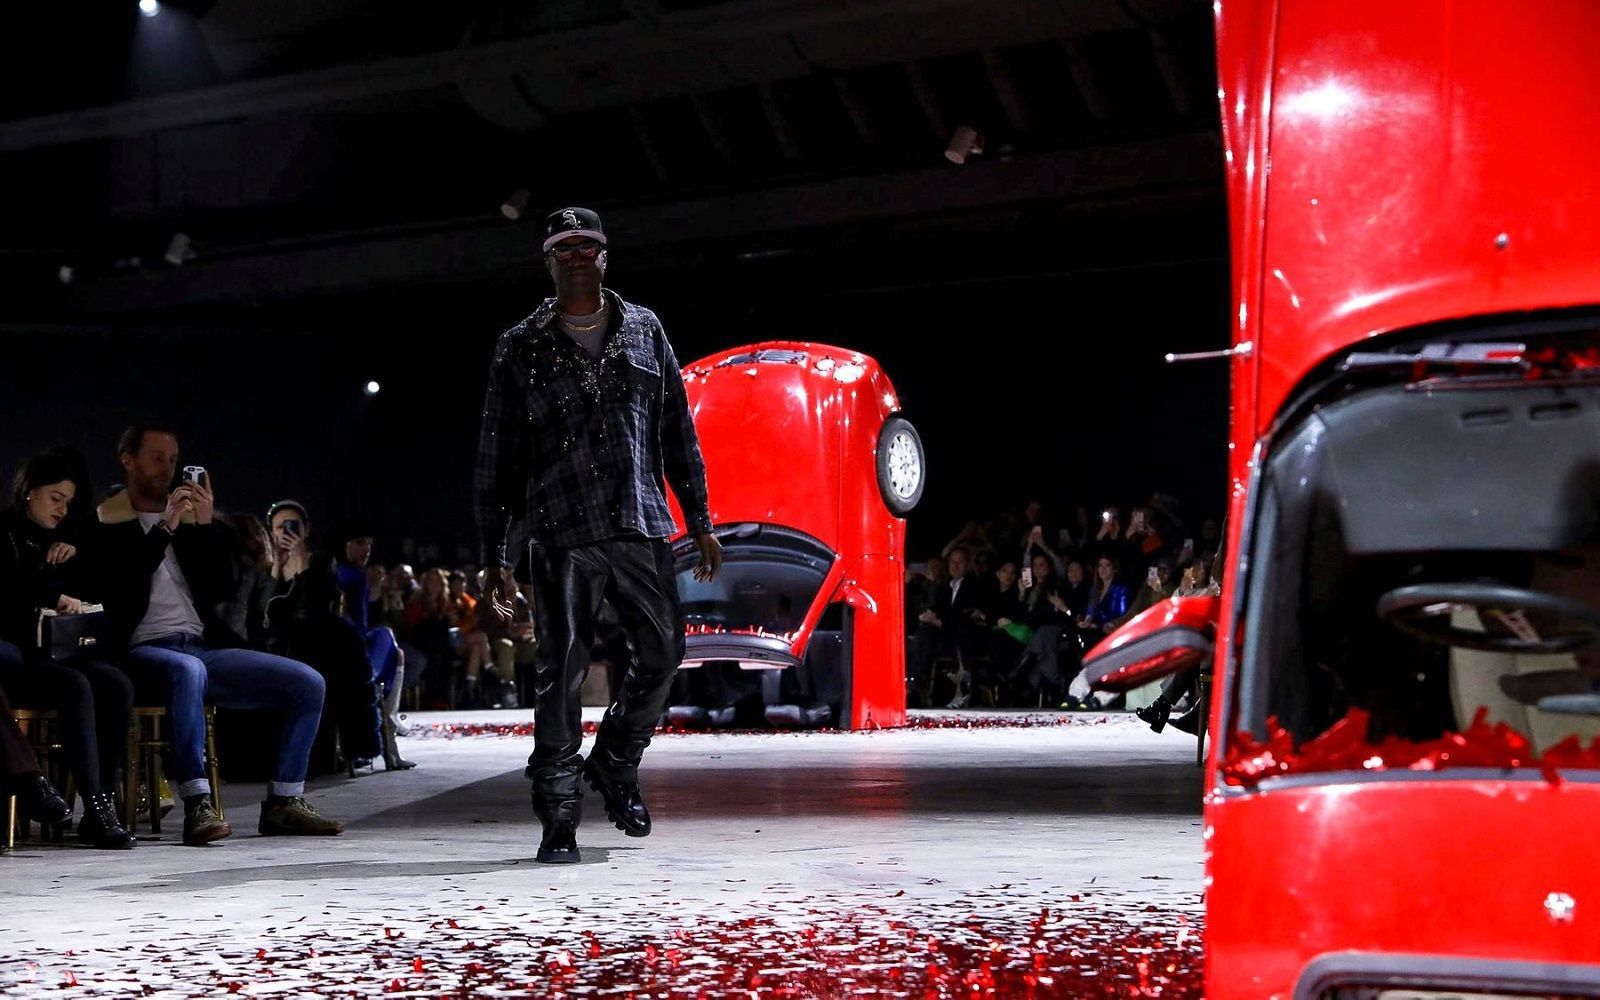 Virgil Abloh decorated the Off-White™ catwalk with vintage cars  L'Art de l'Automobile collaborated with the designer for the brand's latest fashion show